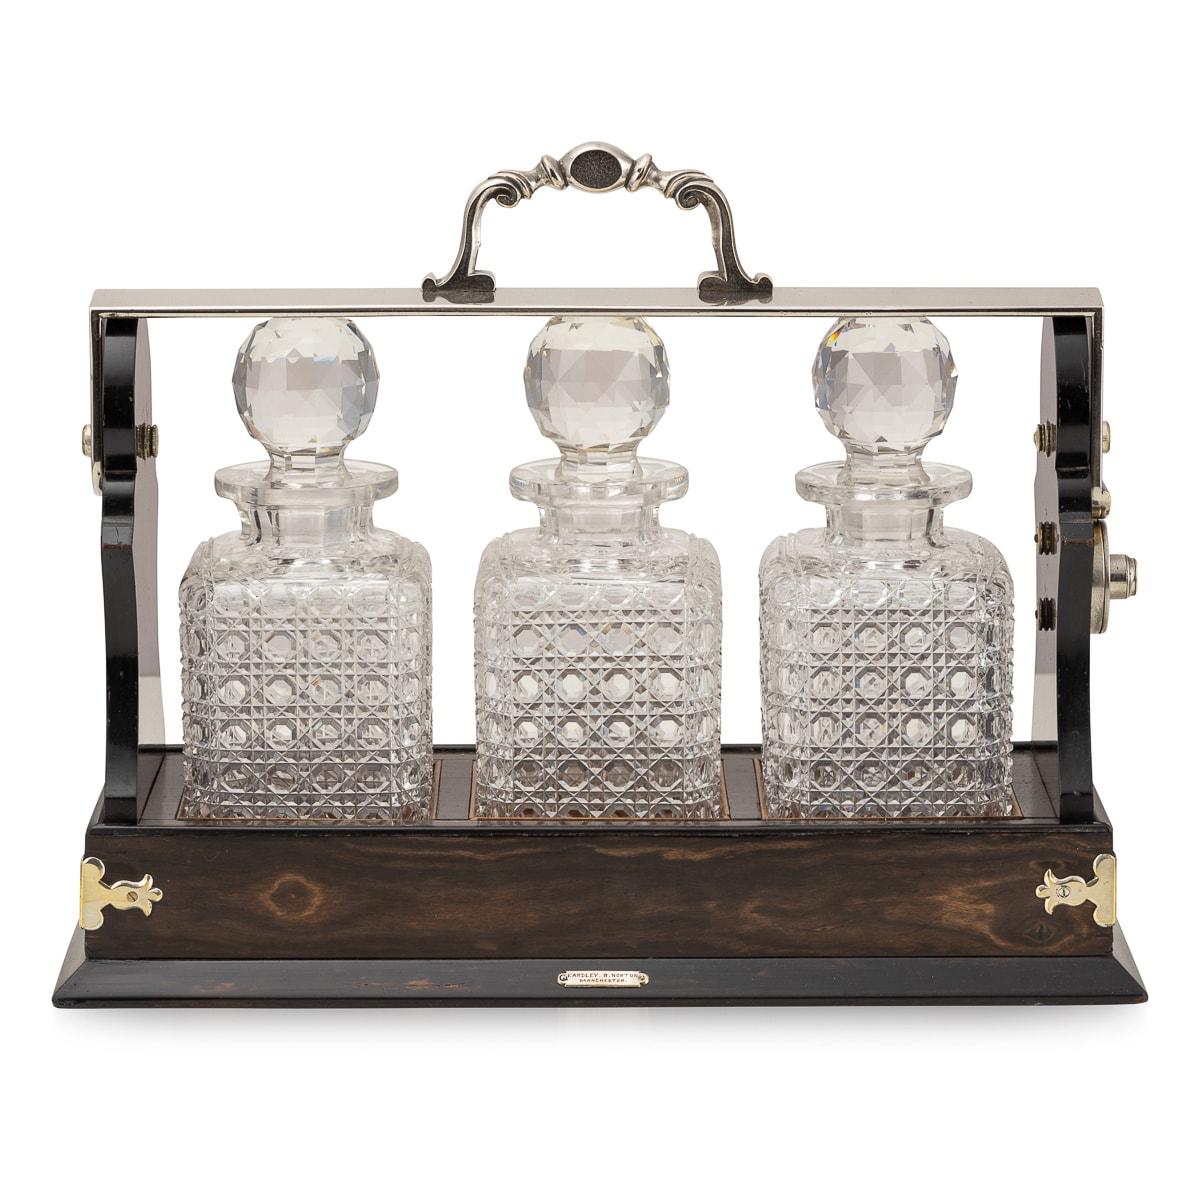 Antique late-19th Century Victorian silver plated mounted on coromandel tantalus, the interior comprising three cut crystal decanters with stoppers.

CONDITION
In Great Condition - No Damage.

SIZE
Height: 32cm
Width: 42cm
Depth: 17cm